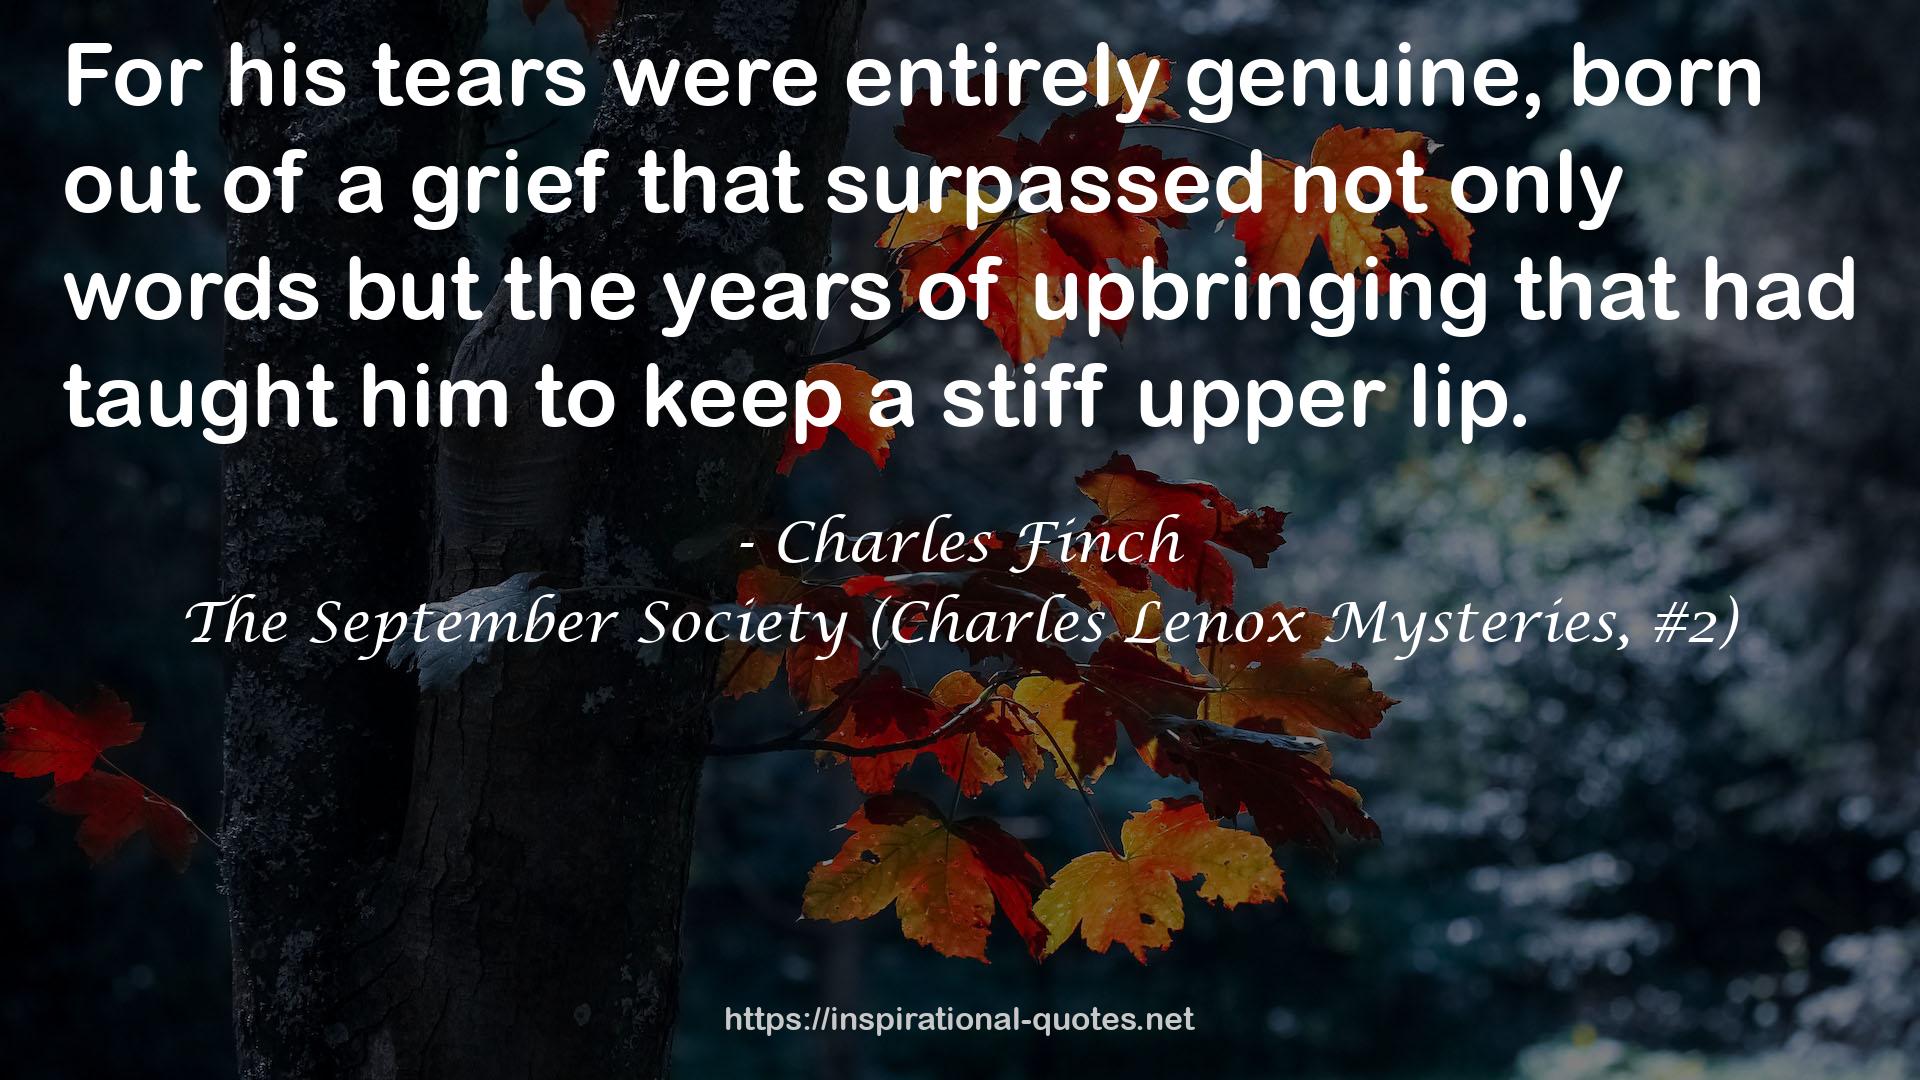 Charles Finch QUOTES